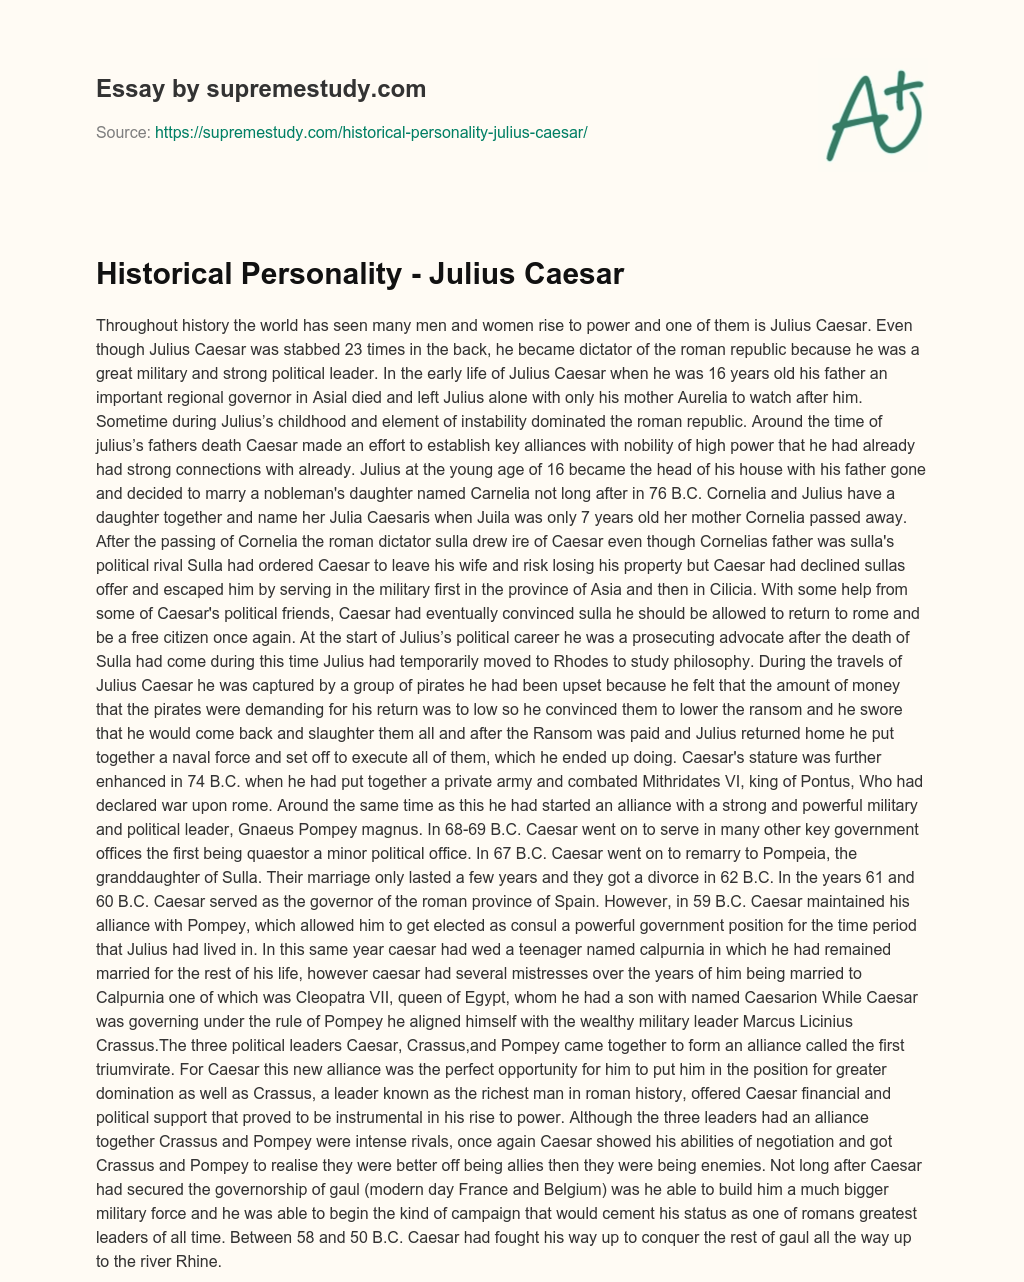 essay on historical personality